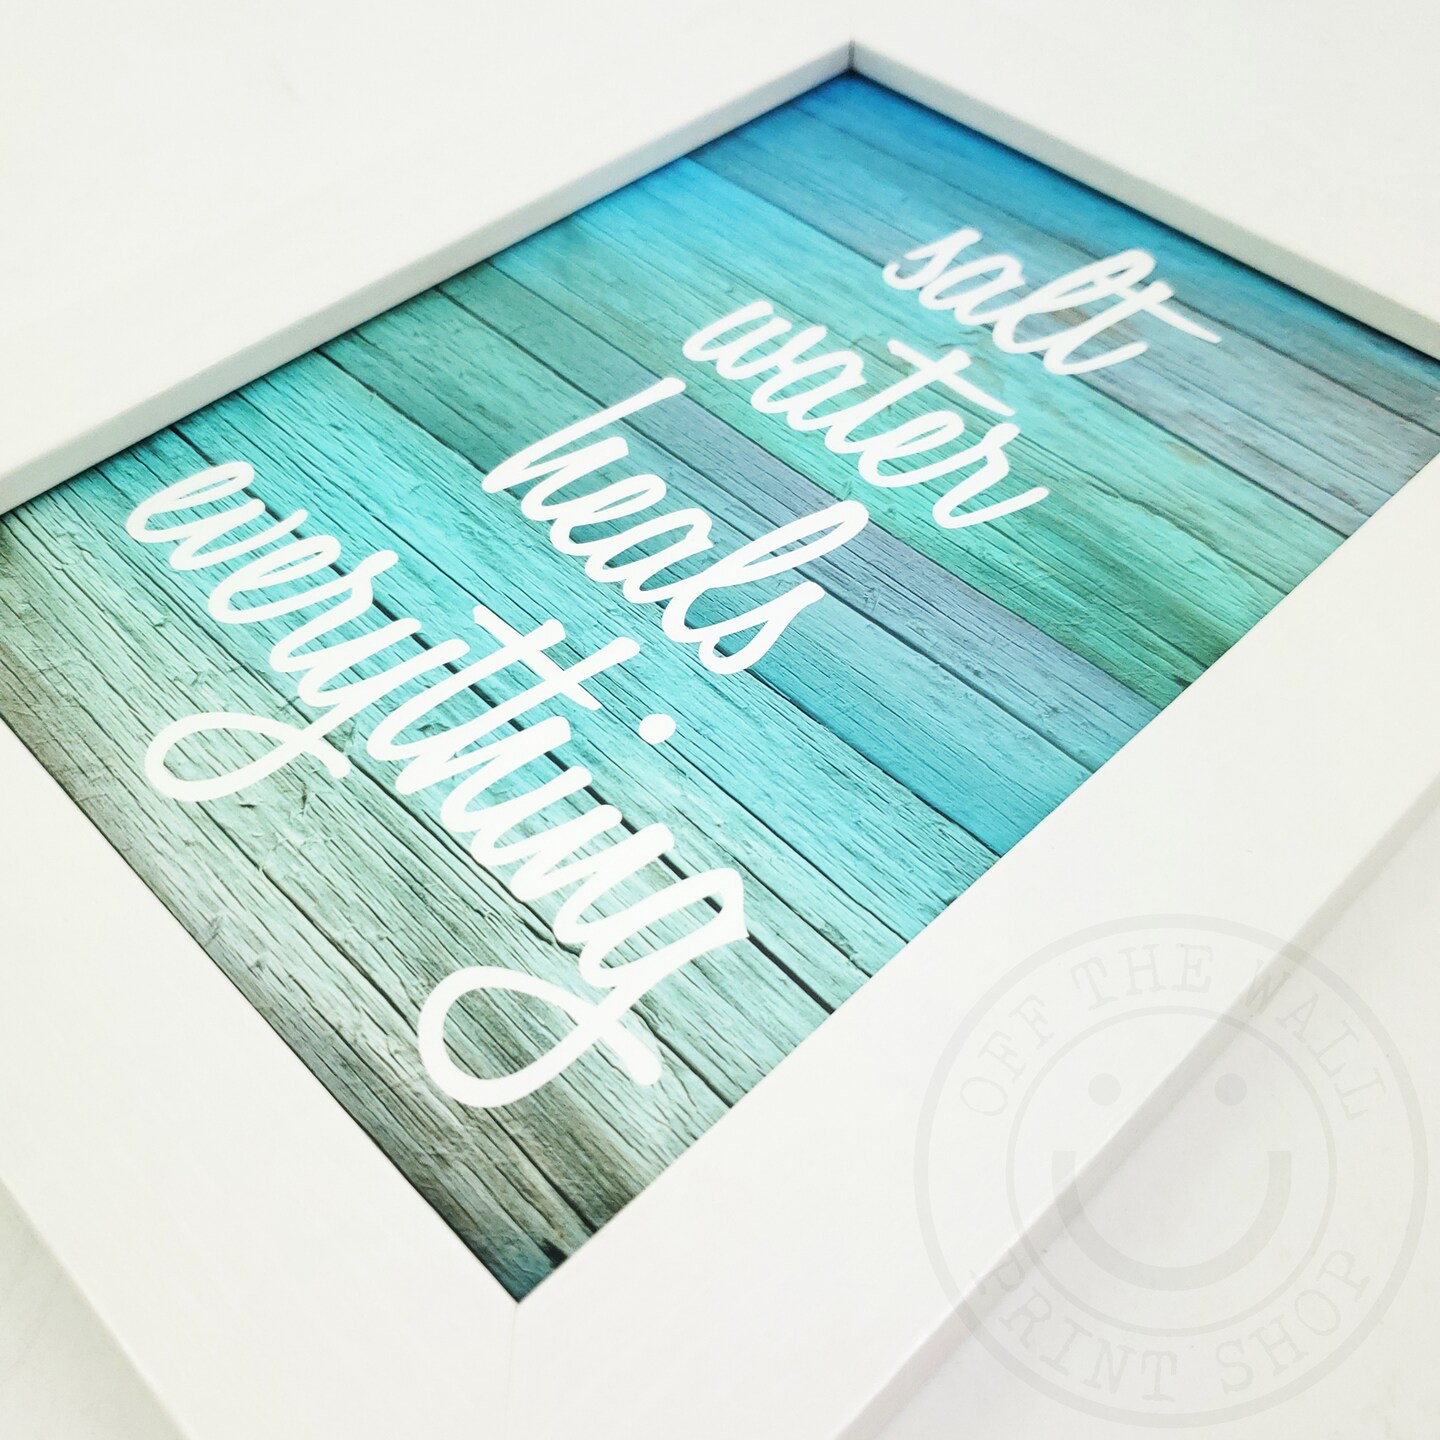  Saltwater Cures Everything Art Print - Cool Beach